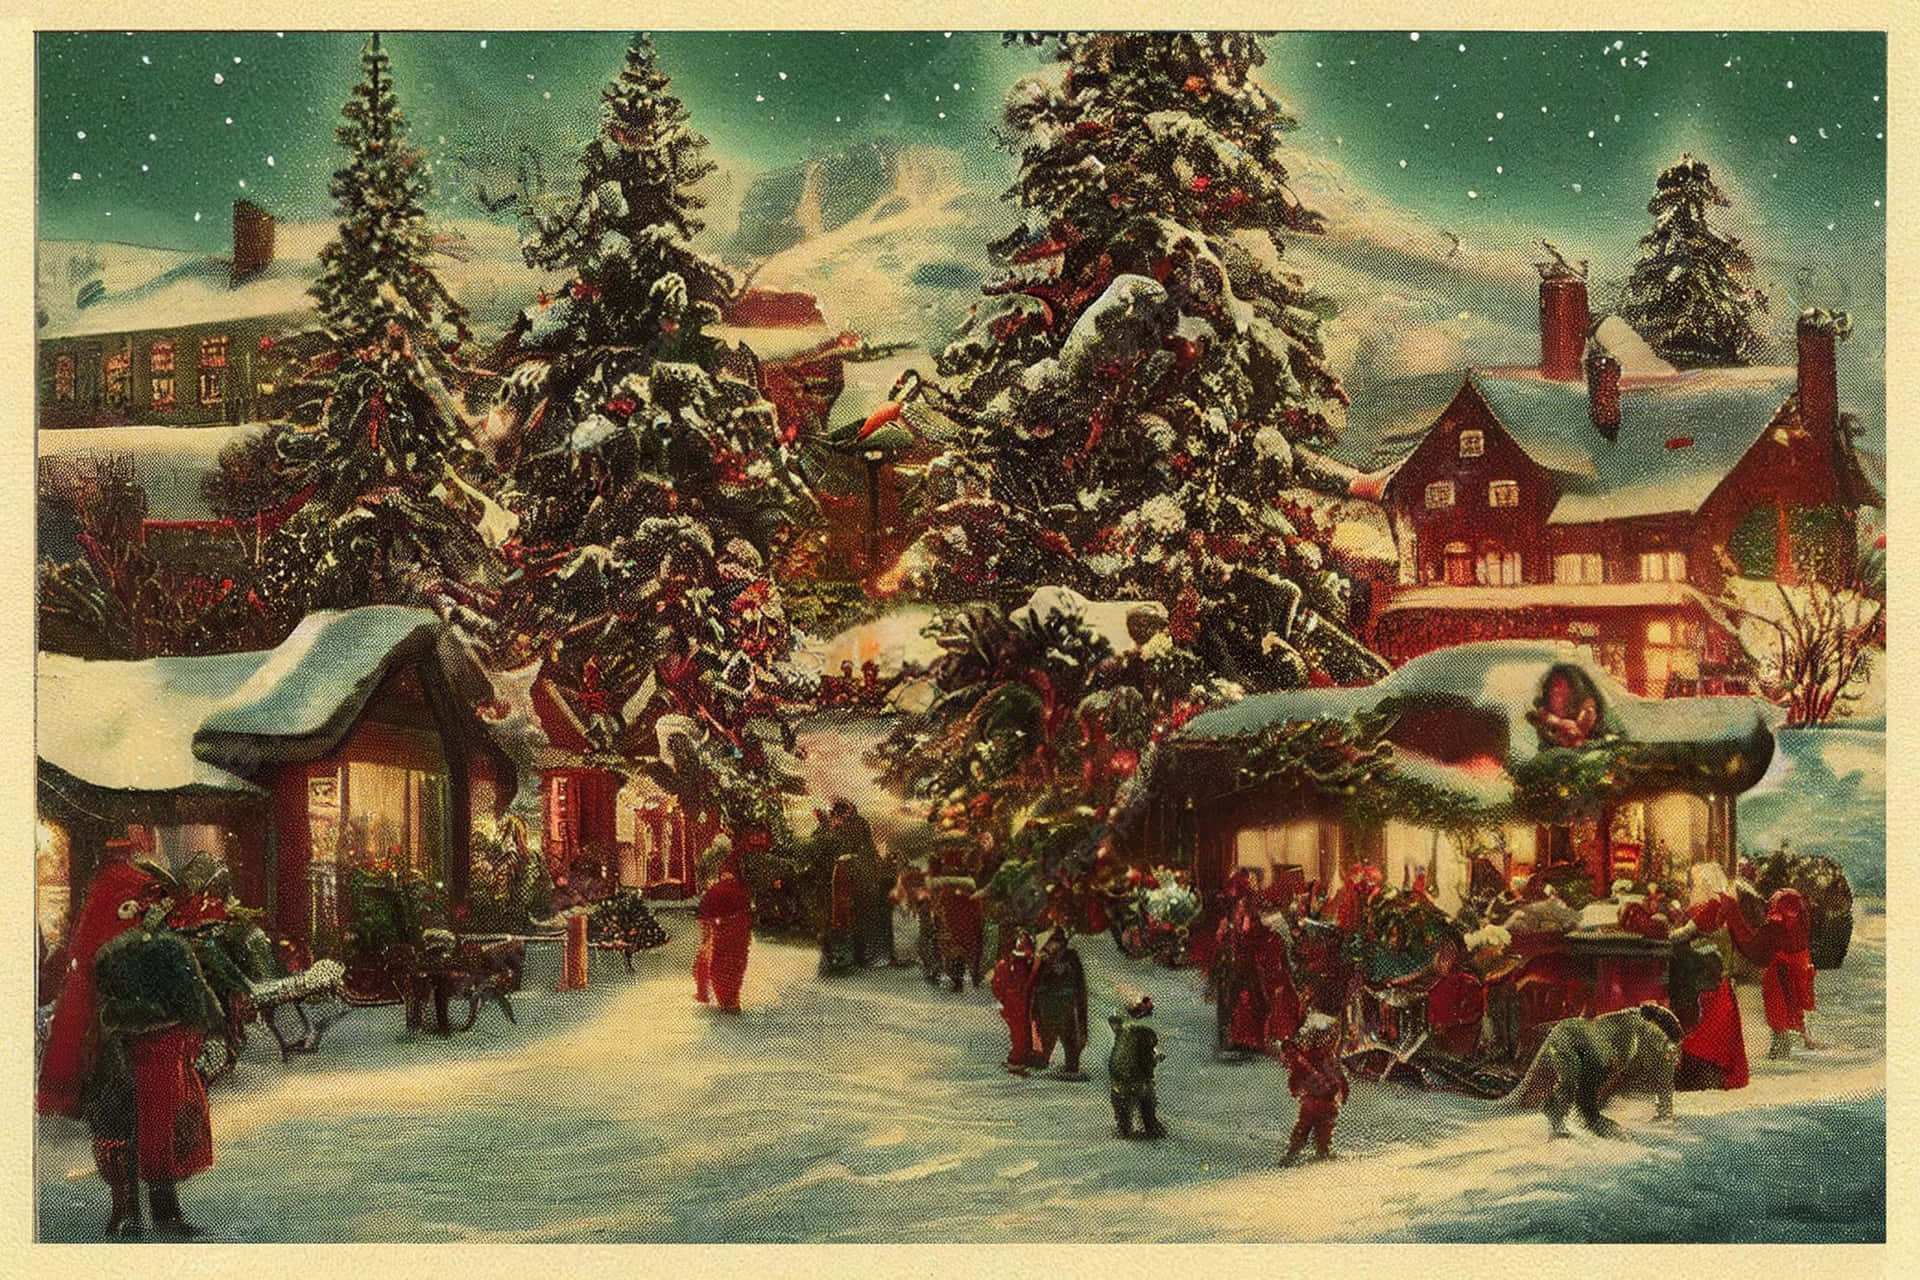 Celebrate the Holidays with Vintage Christmas Decorations Wallpaper